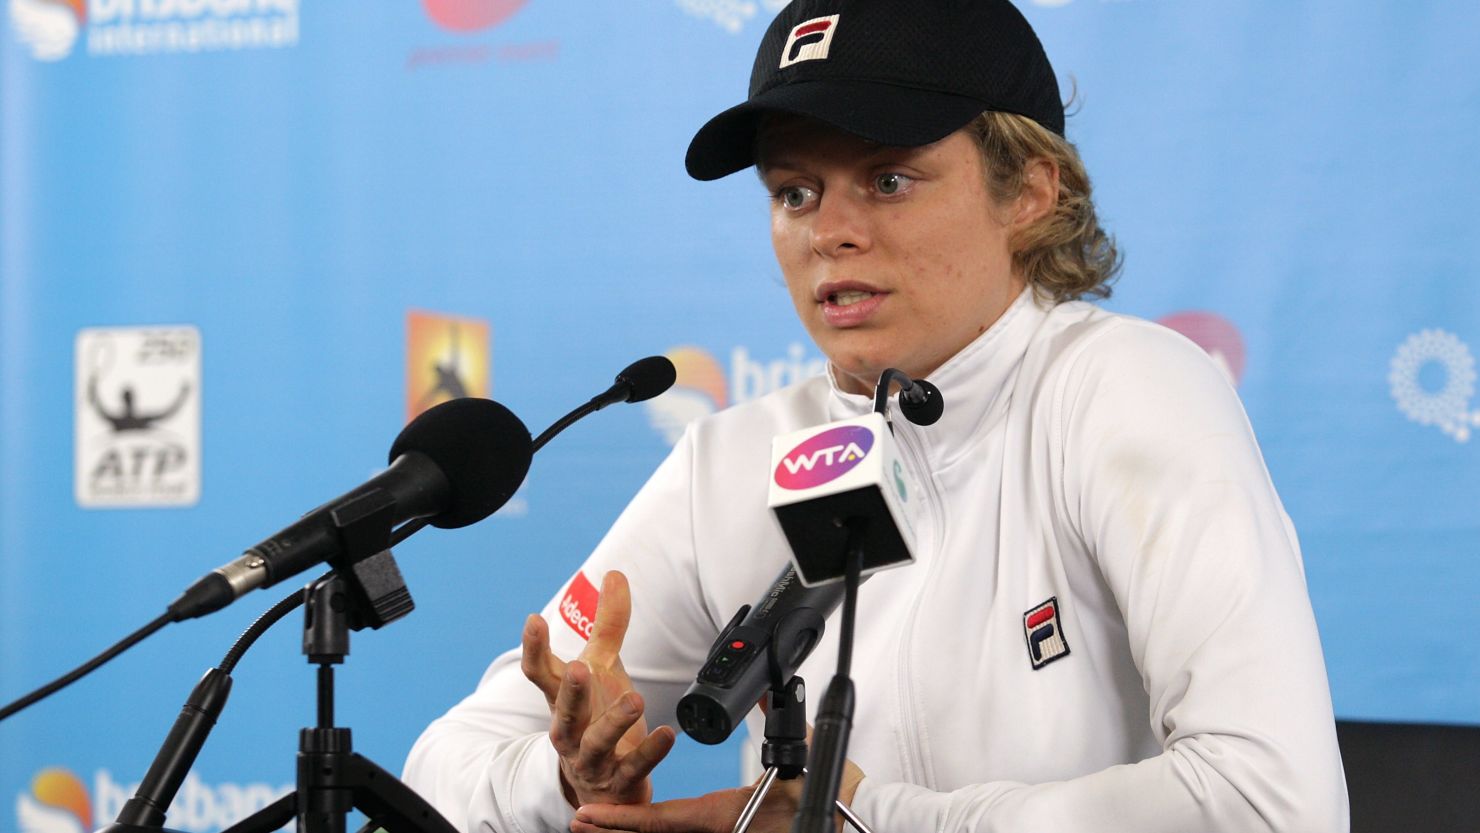 Belgium's Kim Clijsters hopes that pulling out in Brisbane will improve her chances of playing at the Australian Open.